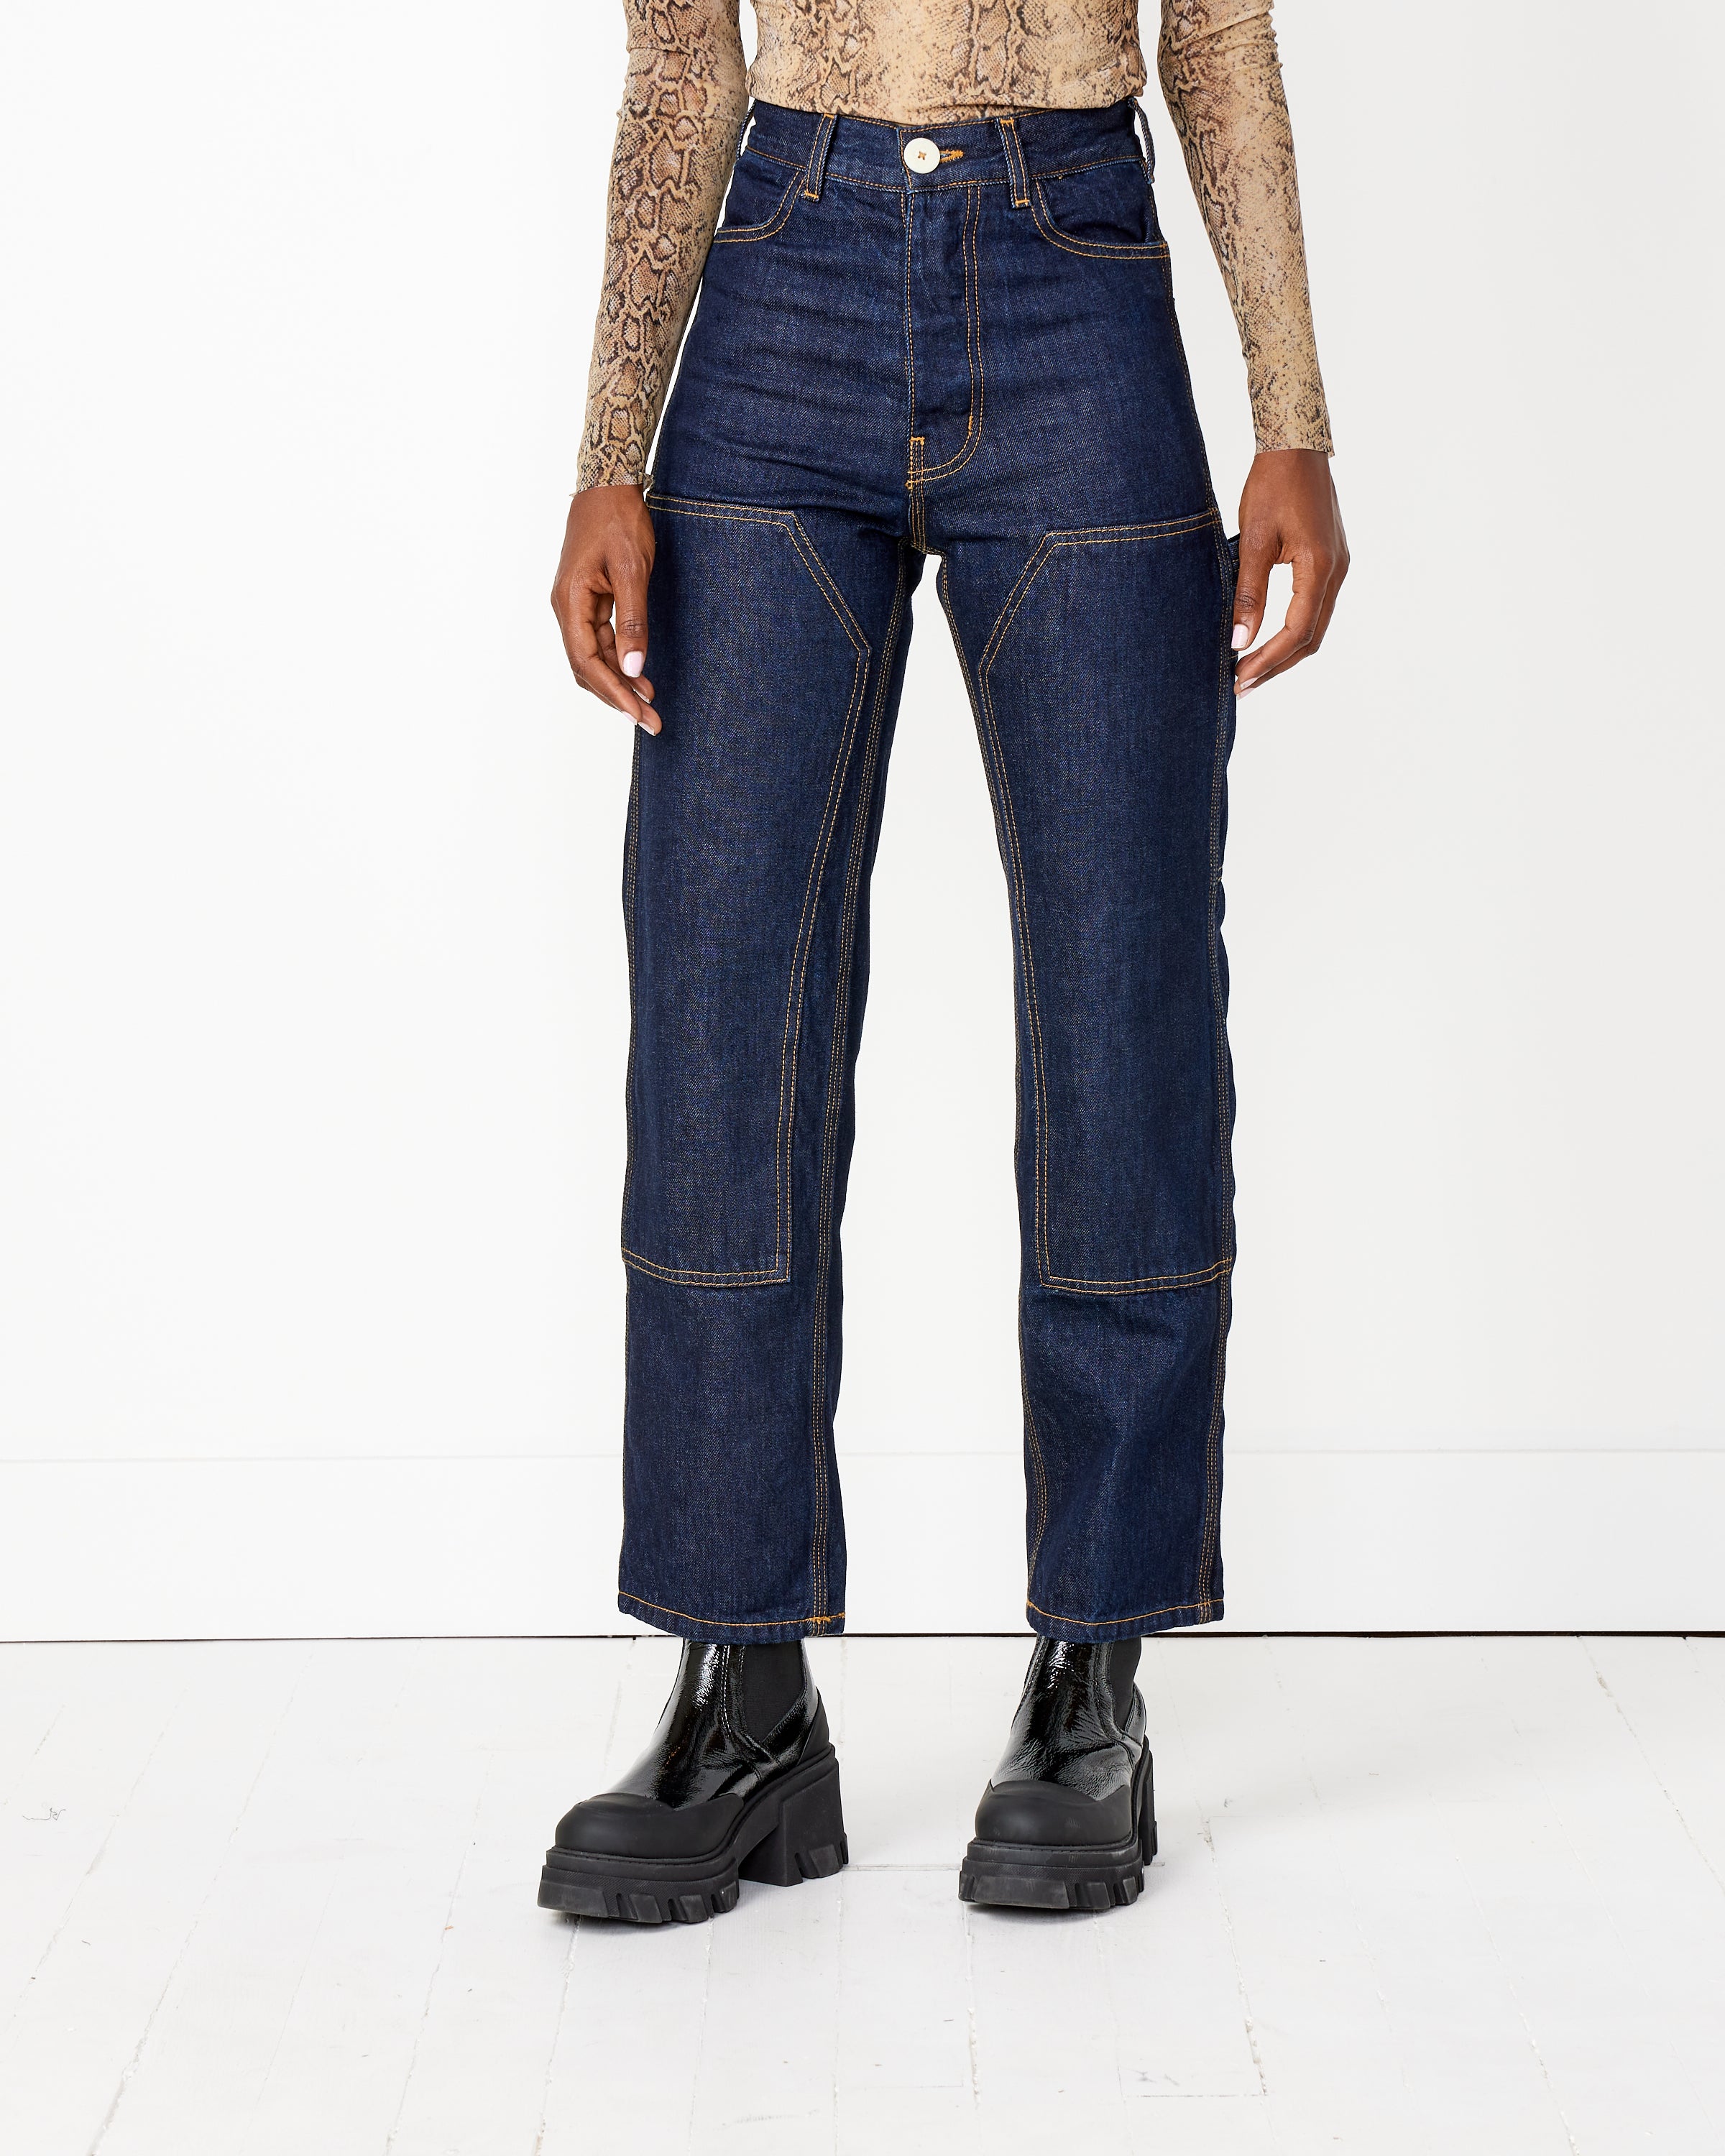 Patchfront Handy Pant in Dark Blue